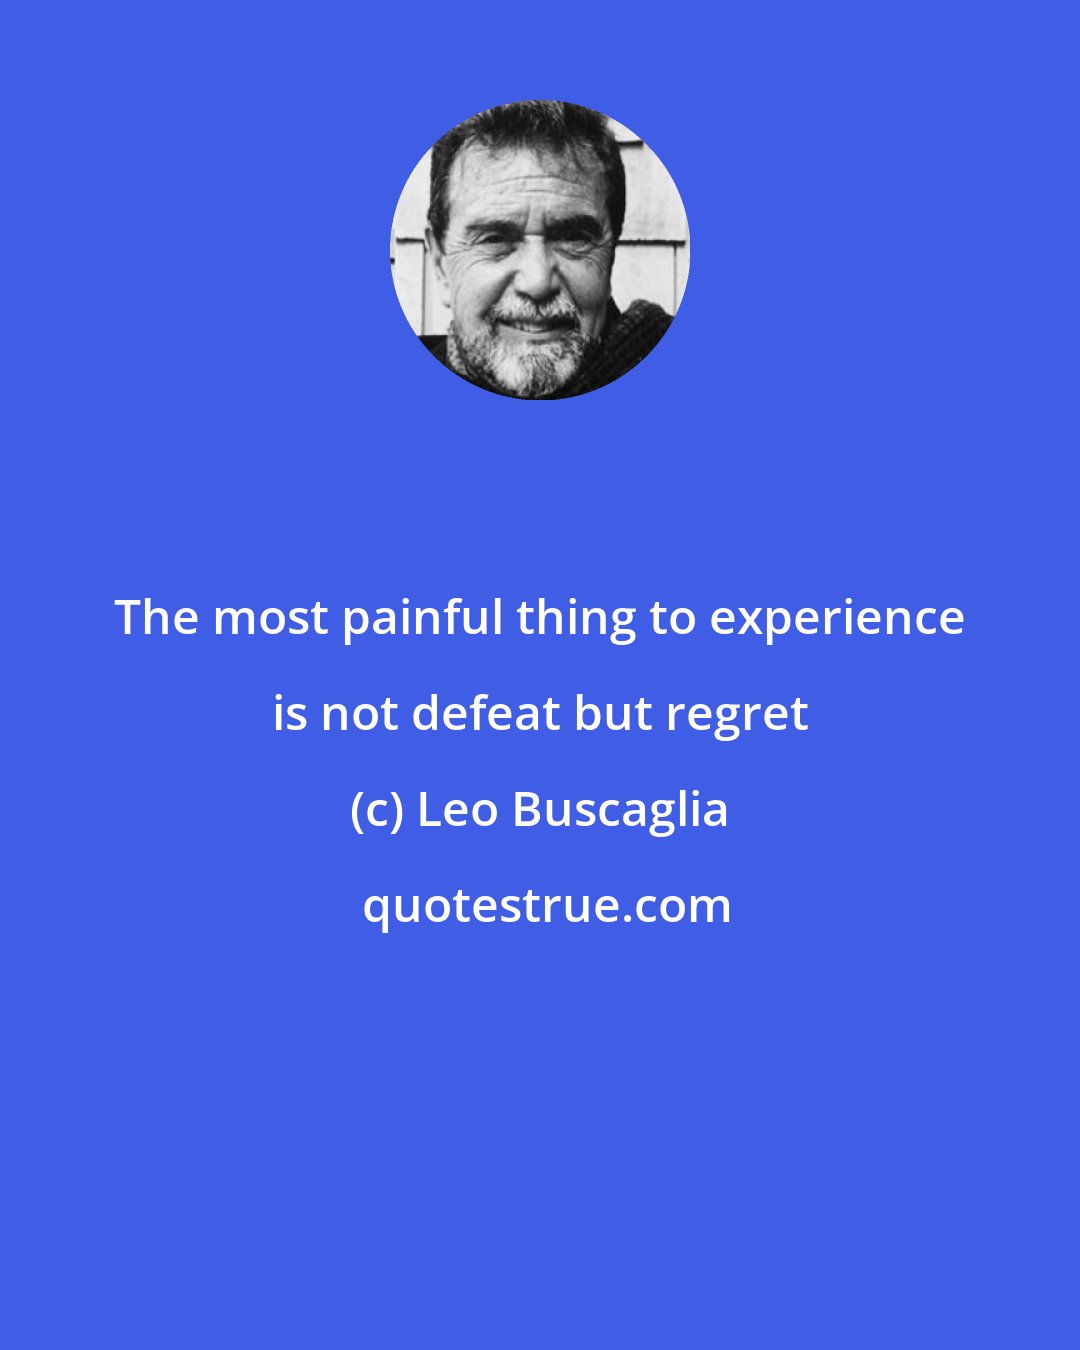 Leo Buscaglia: The most painful thing to experience is not defeat but regret